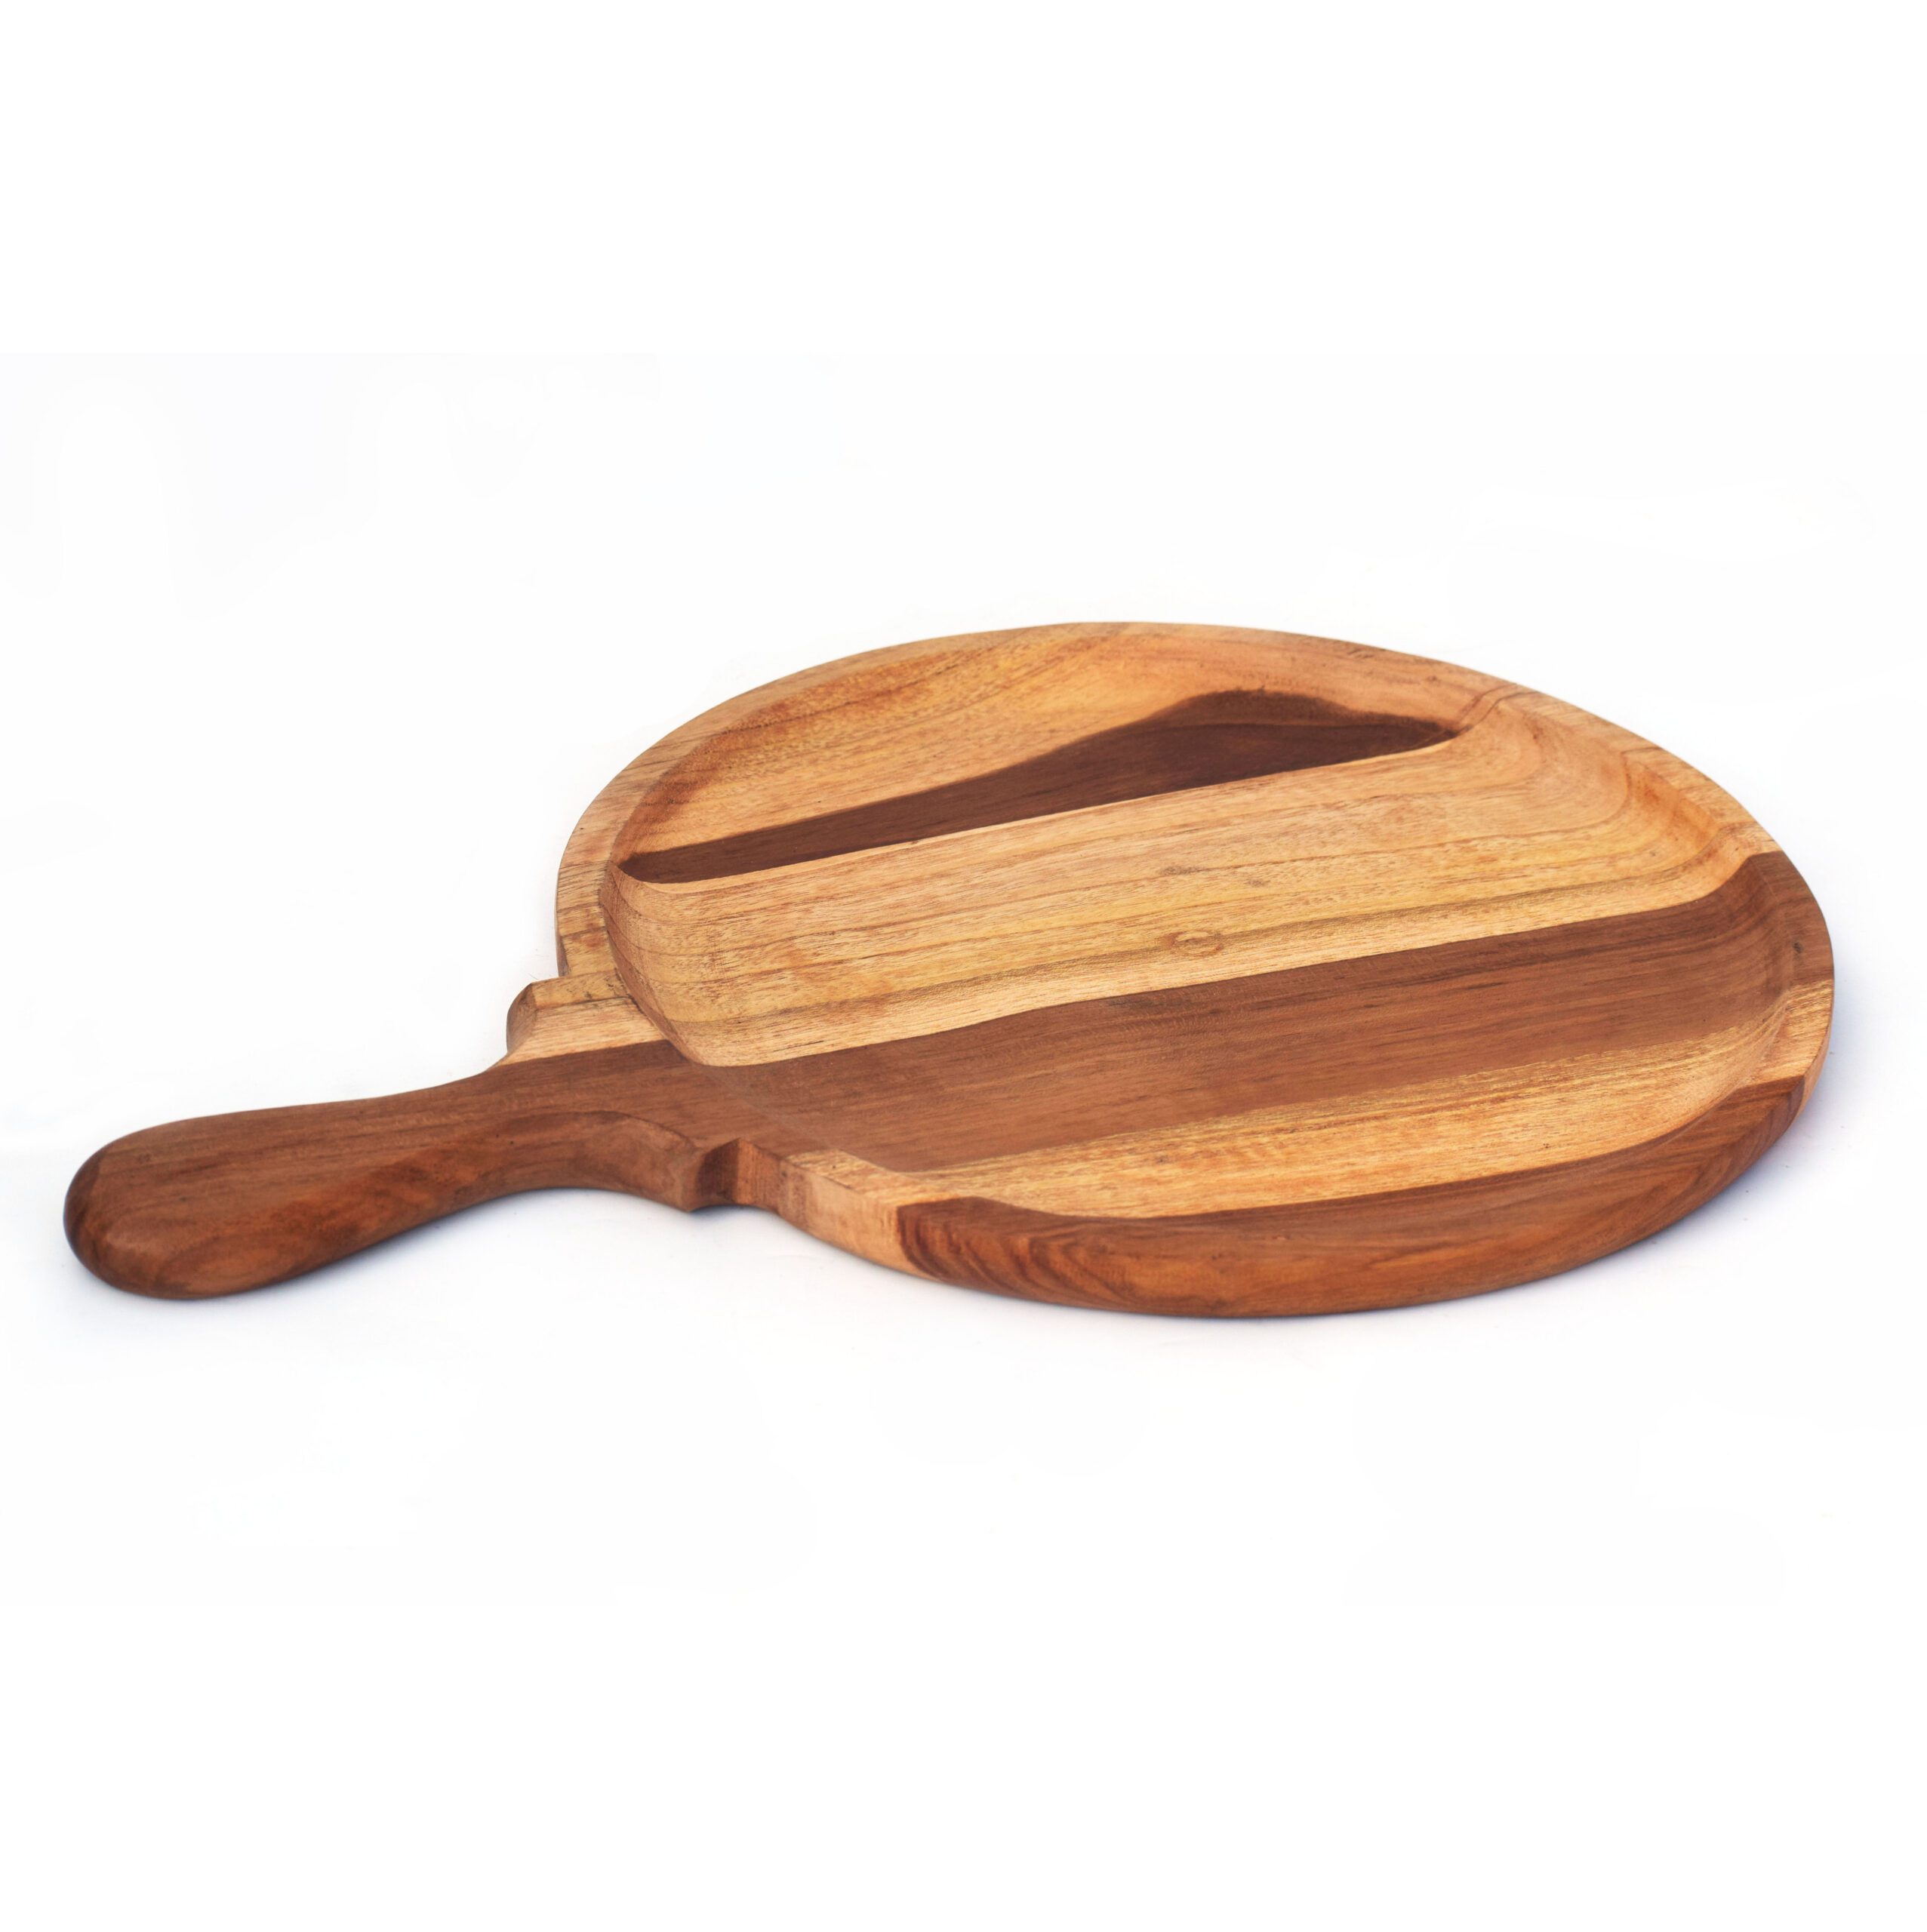 Mango Wooden Crafted Serving Tray | Serving tray | Home decor items